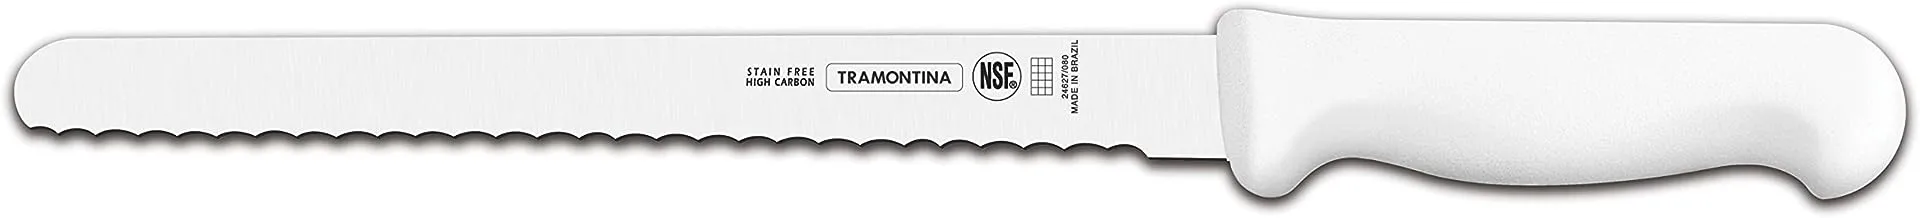 Tramontina Professional 10 Inches Ham Knife with Stainless Steel Blade and White Polypropylene Handle